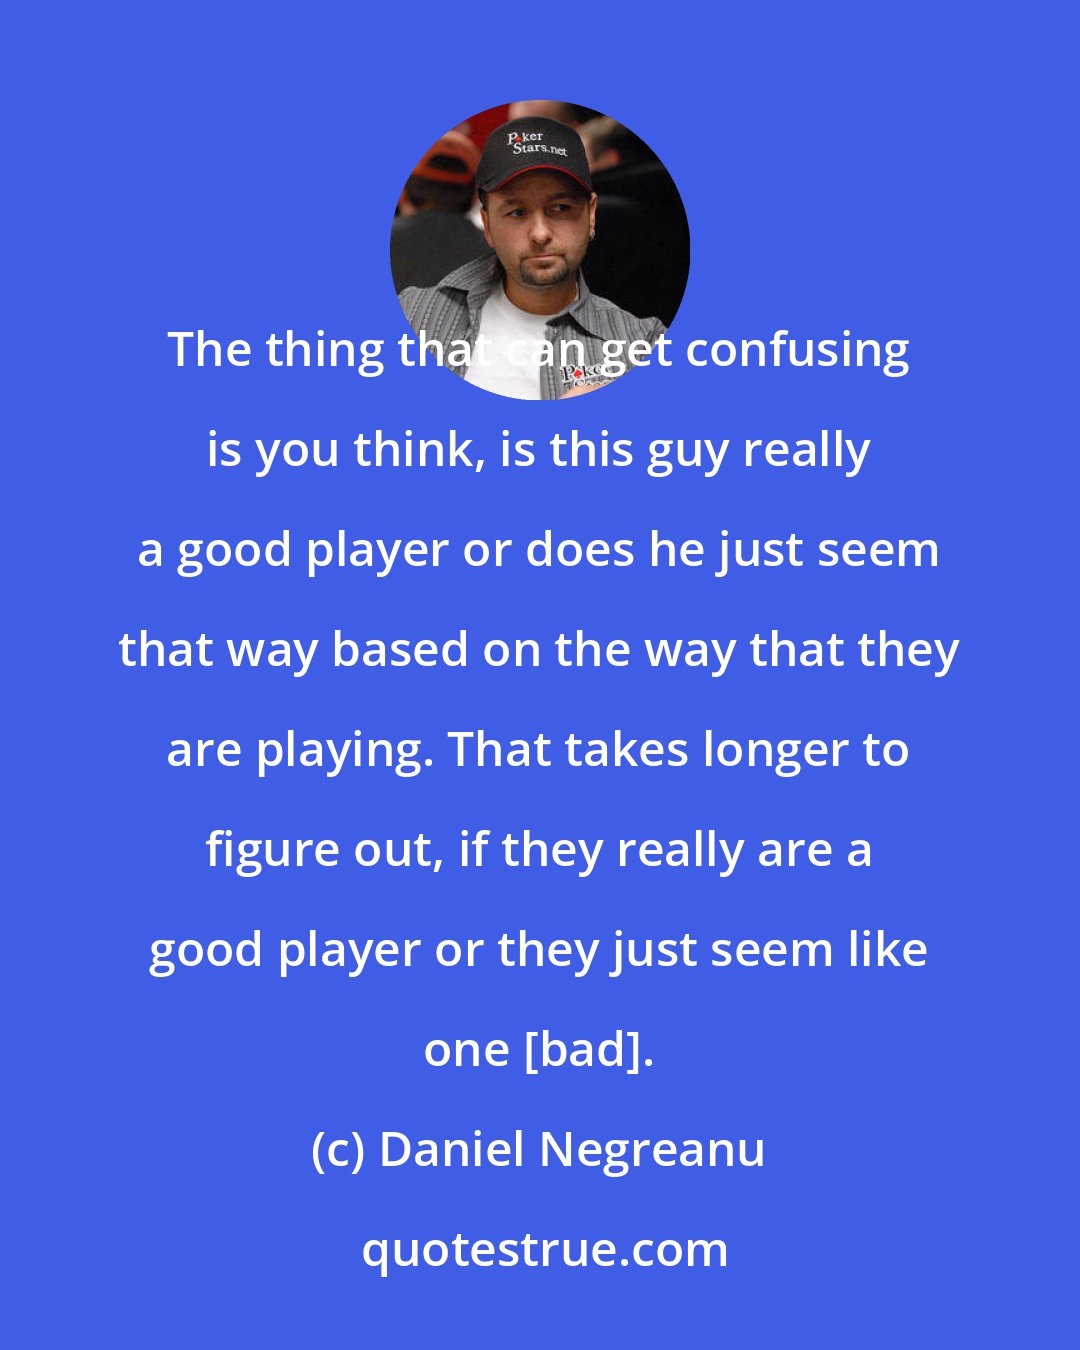 Daniel Negreanu: The thing that can get confusing is you think, is this guy really a good player or does he just seem that way based on the way that they are playing. That takes longer to figure out, if they really are a good player or they just seem like one [bad].